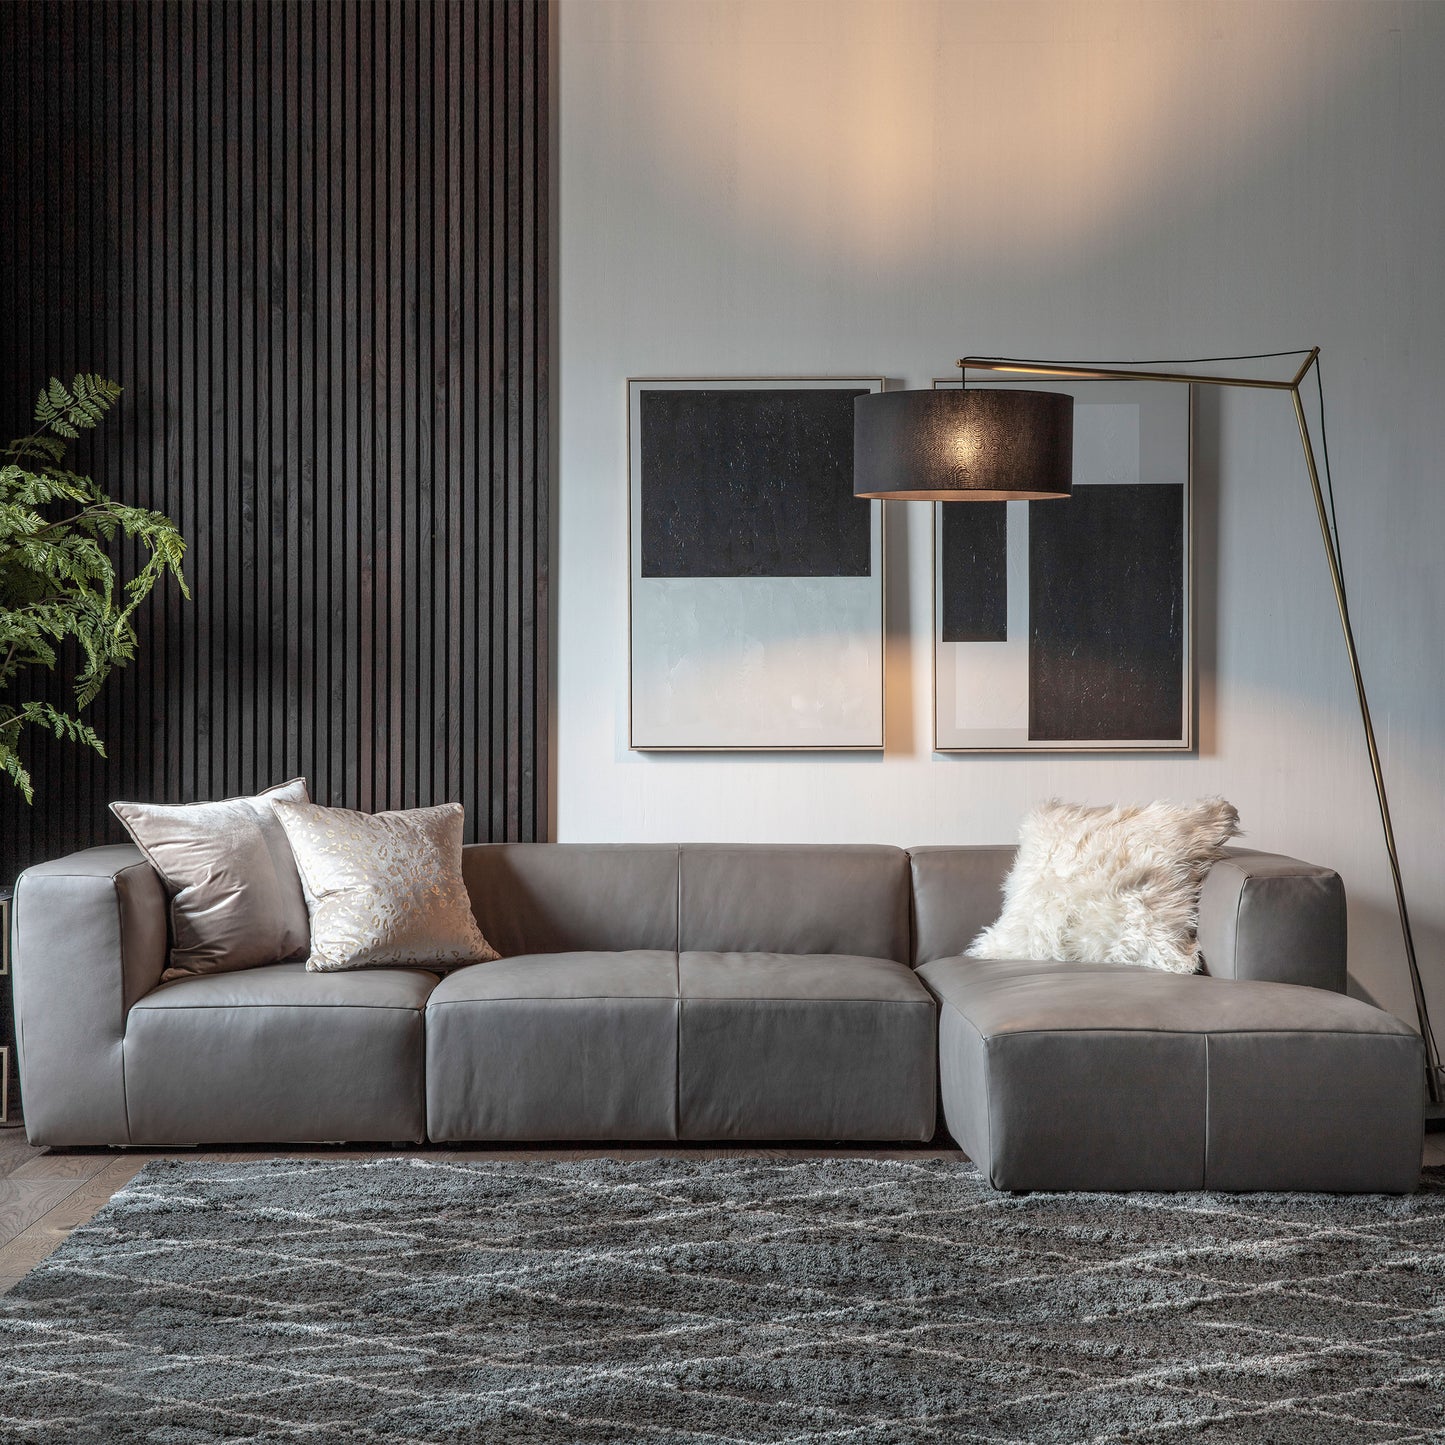 A modern living room with a Ravenna Corner Chaise Grey Leather sofa for stylish home furniture and interior decor.